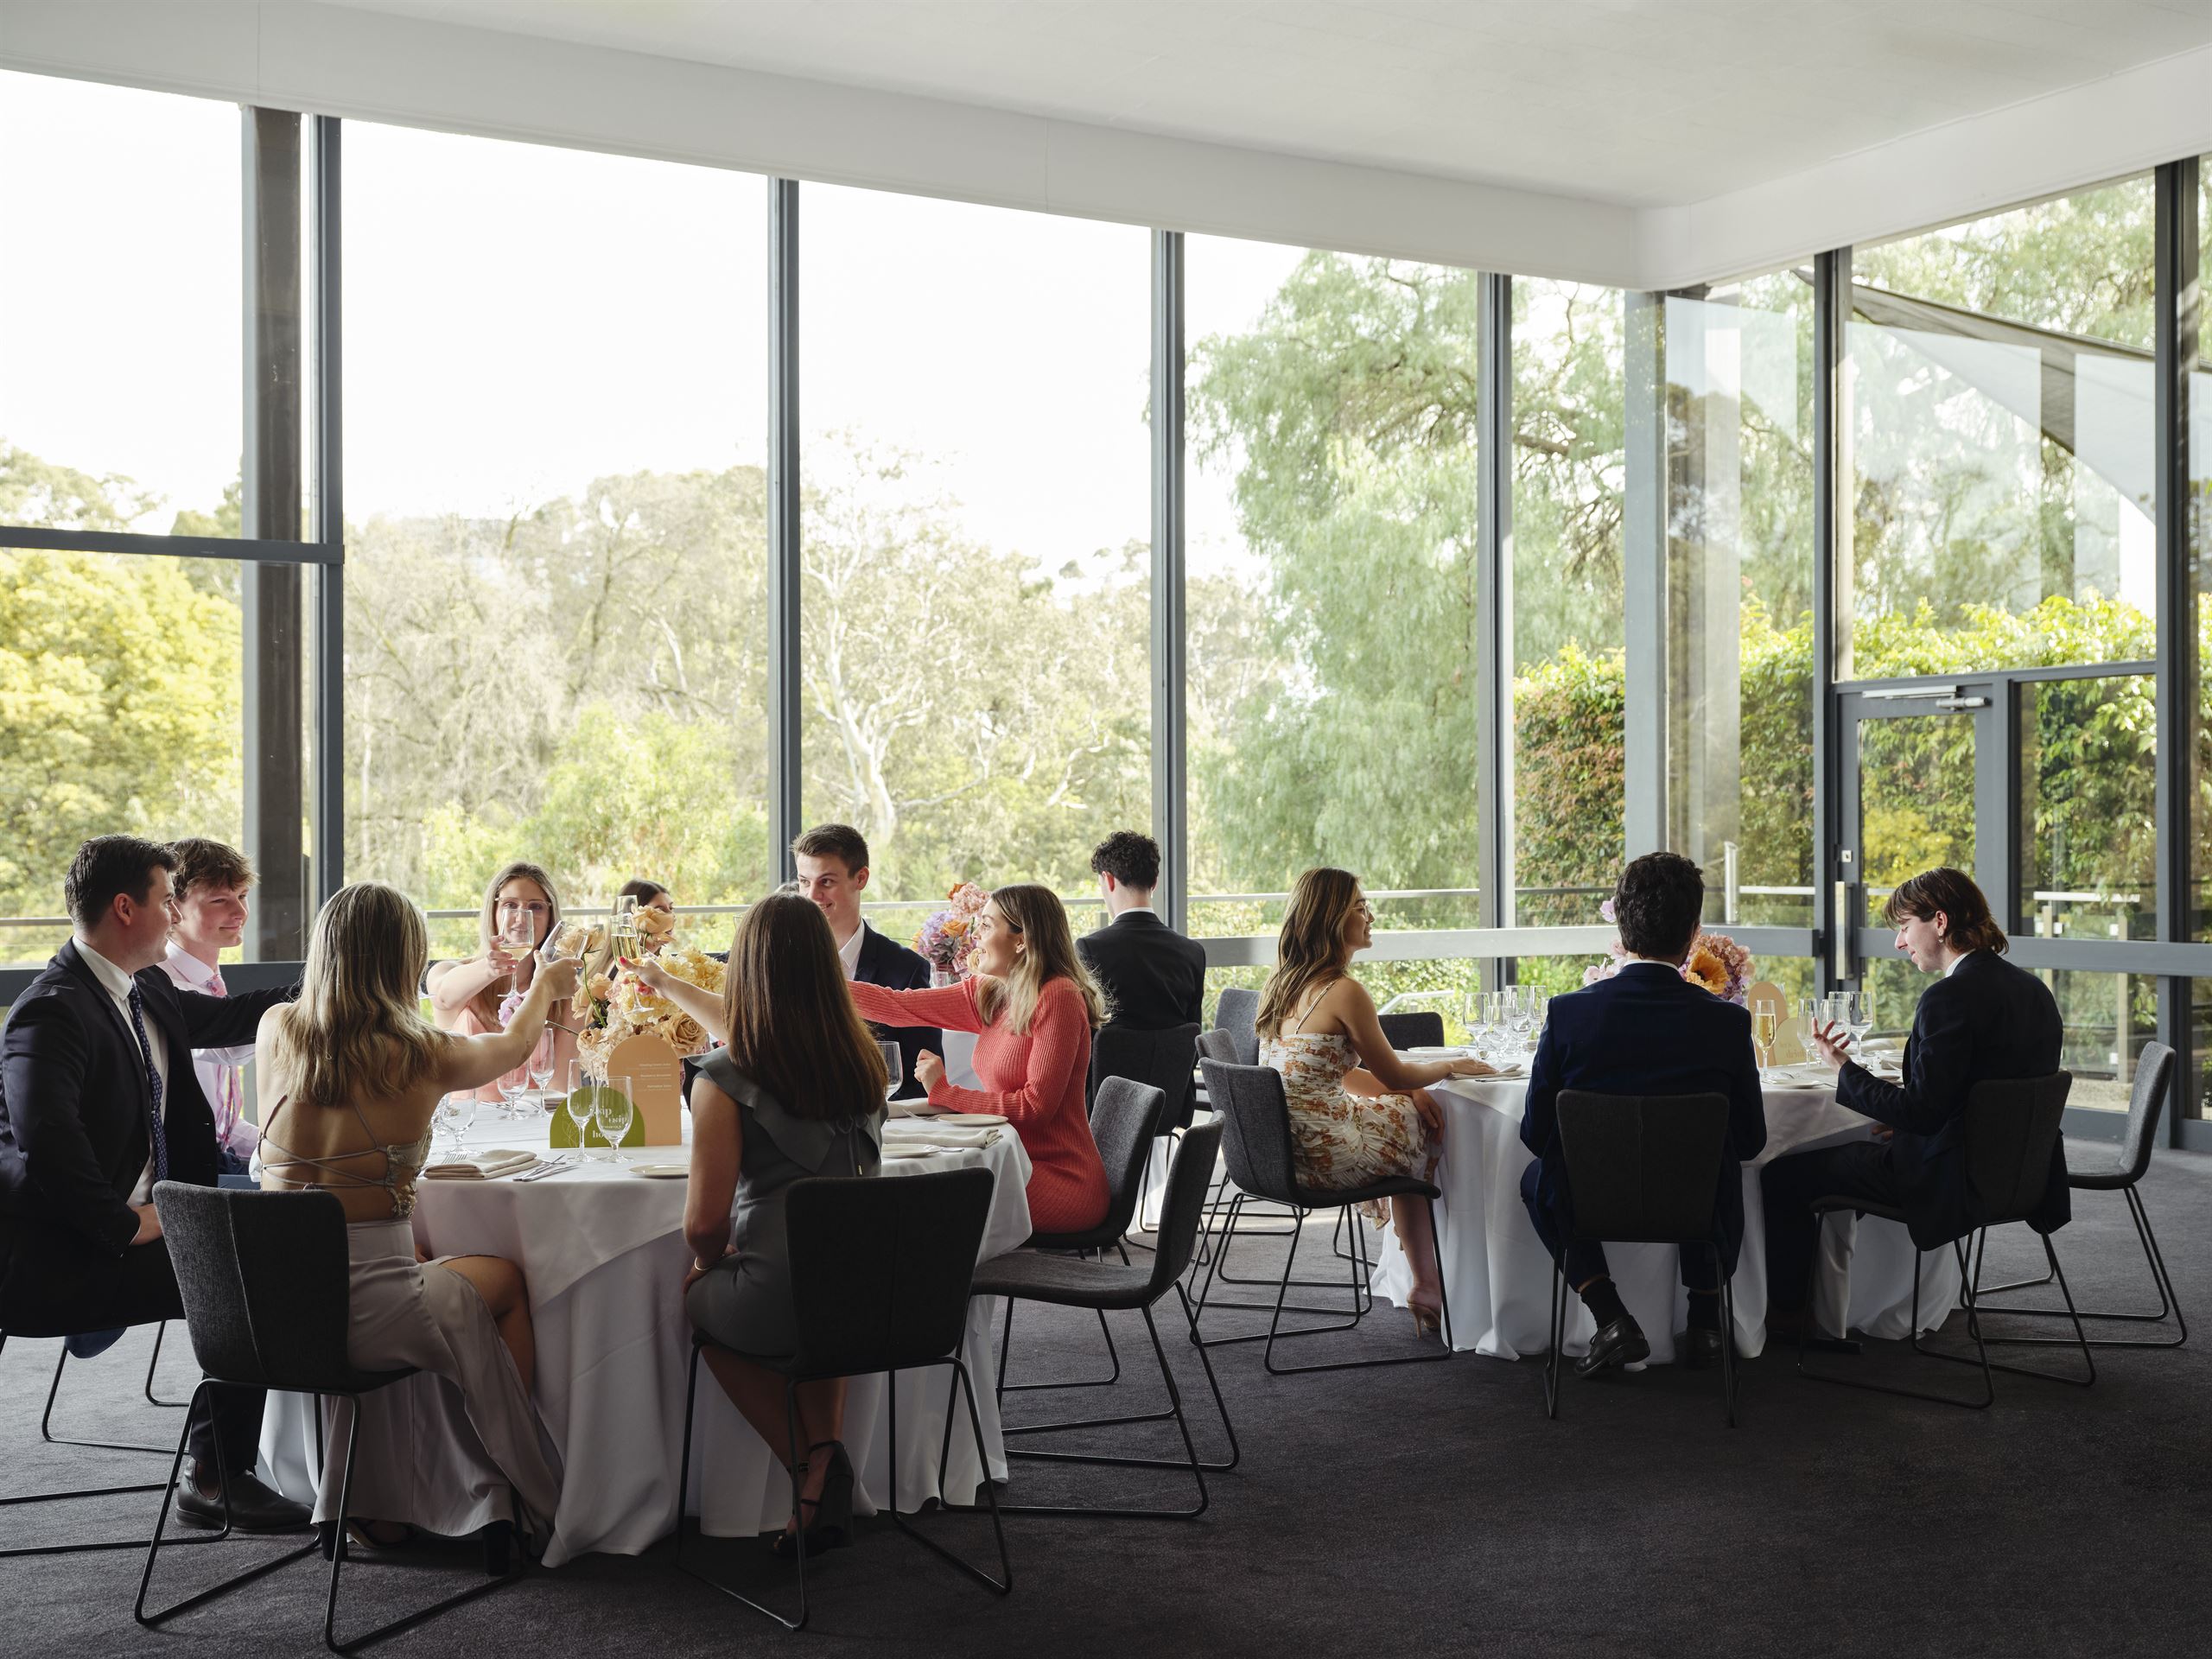 A bustling room filled with people sitting at tables, enjoying an event at one of the School Formal Venues in Melbourne.